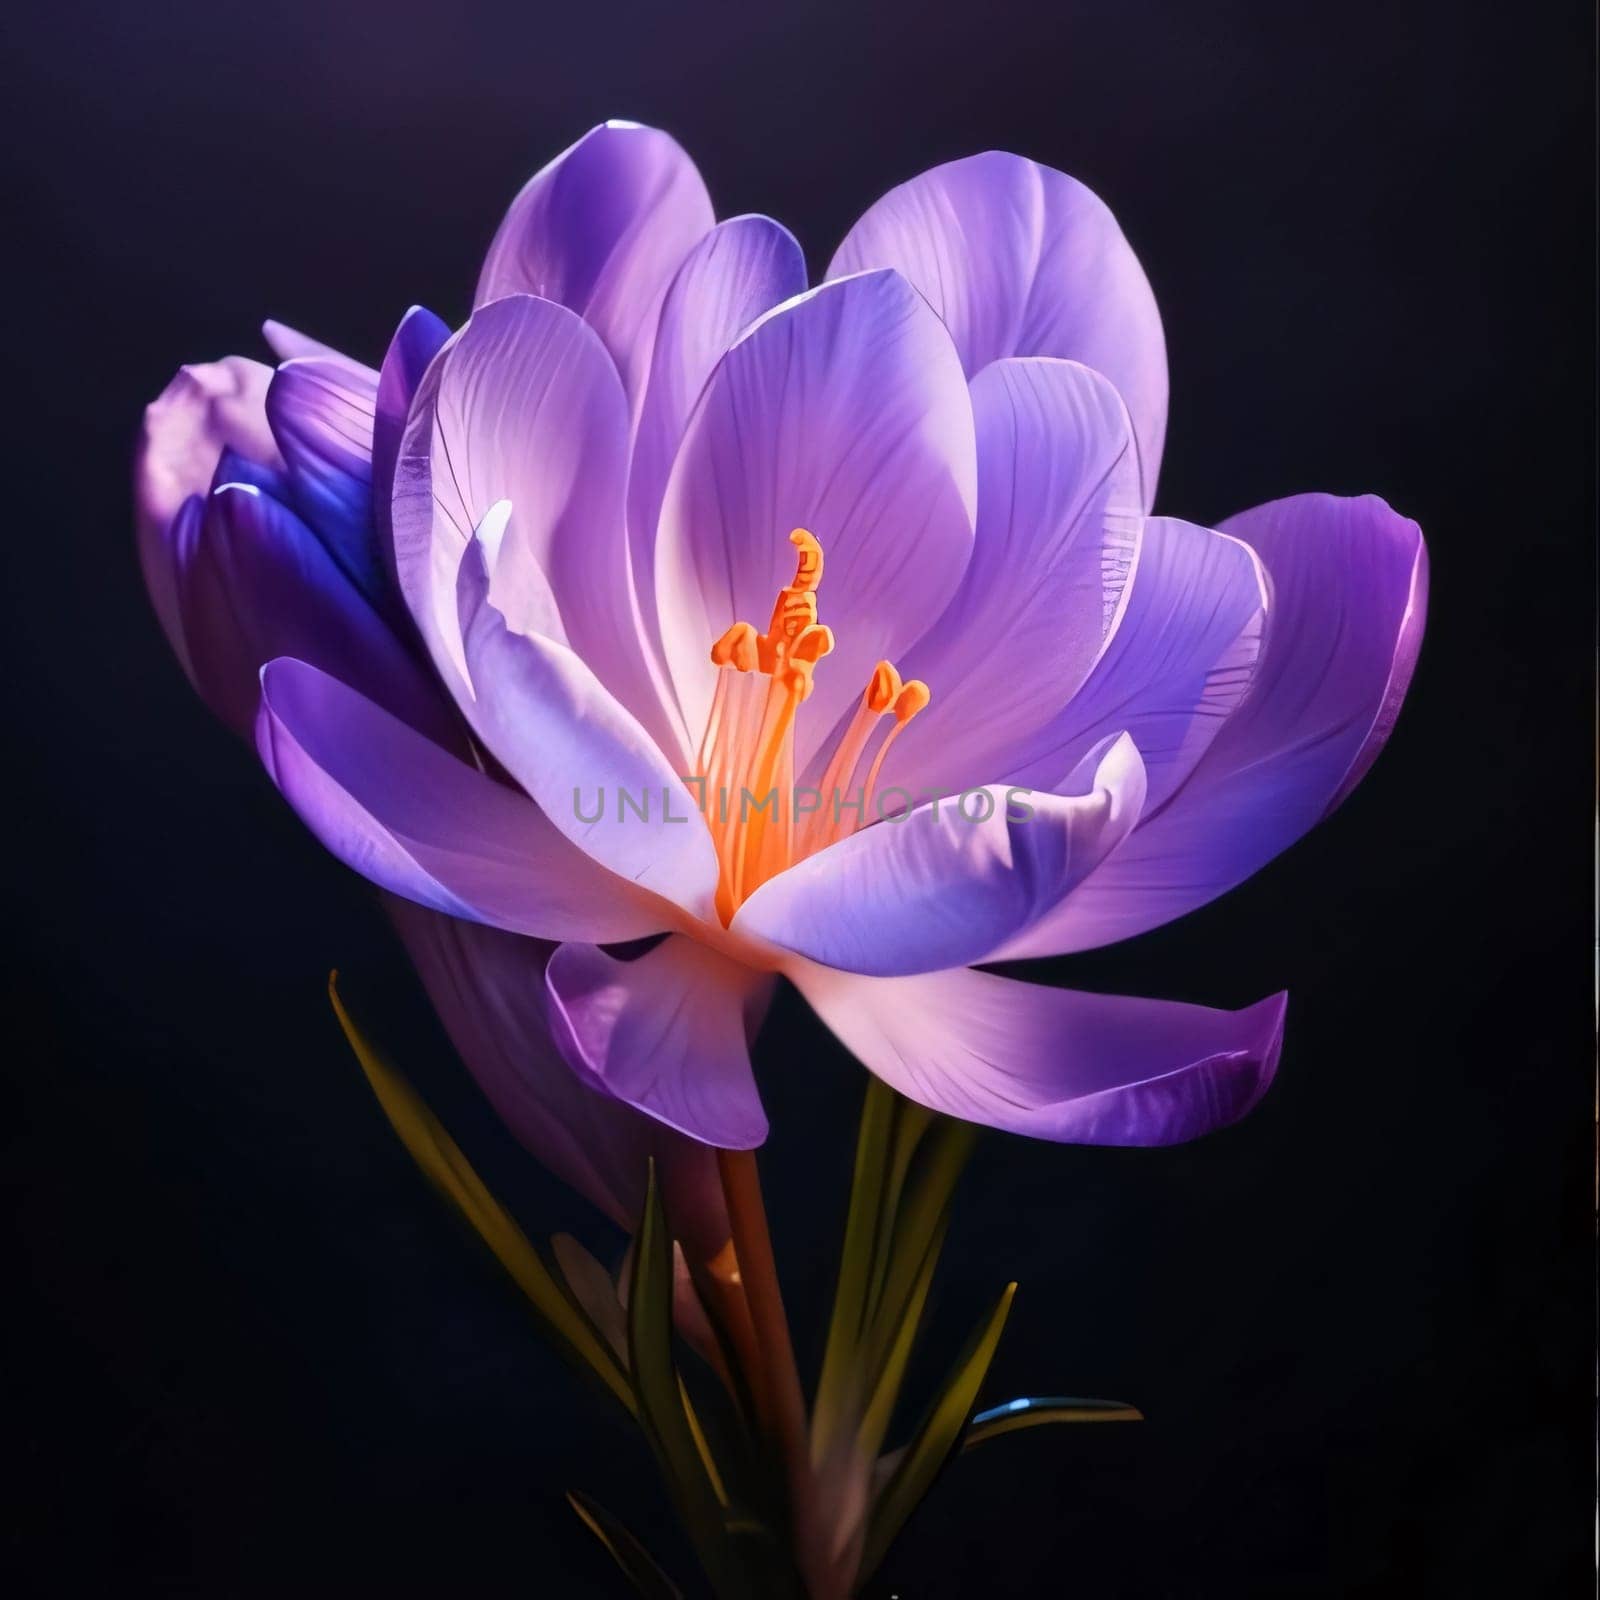 Purple crocus on dark background. Flowering flowers, a symbol of spring, new life. A joyful time of nature waking up to life.